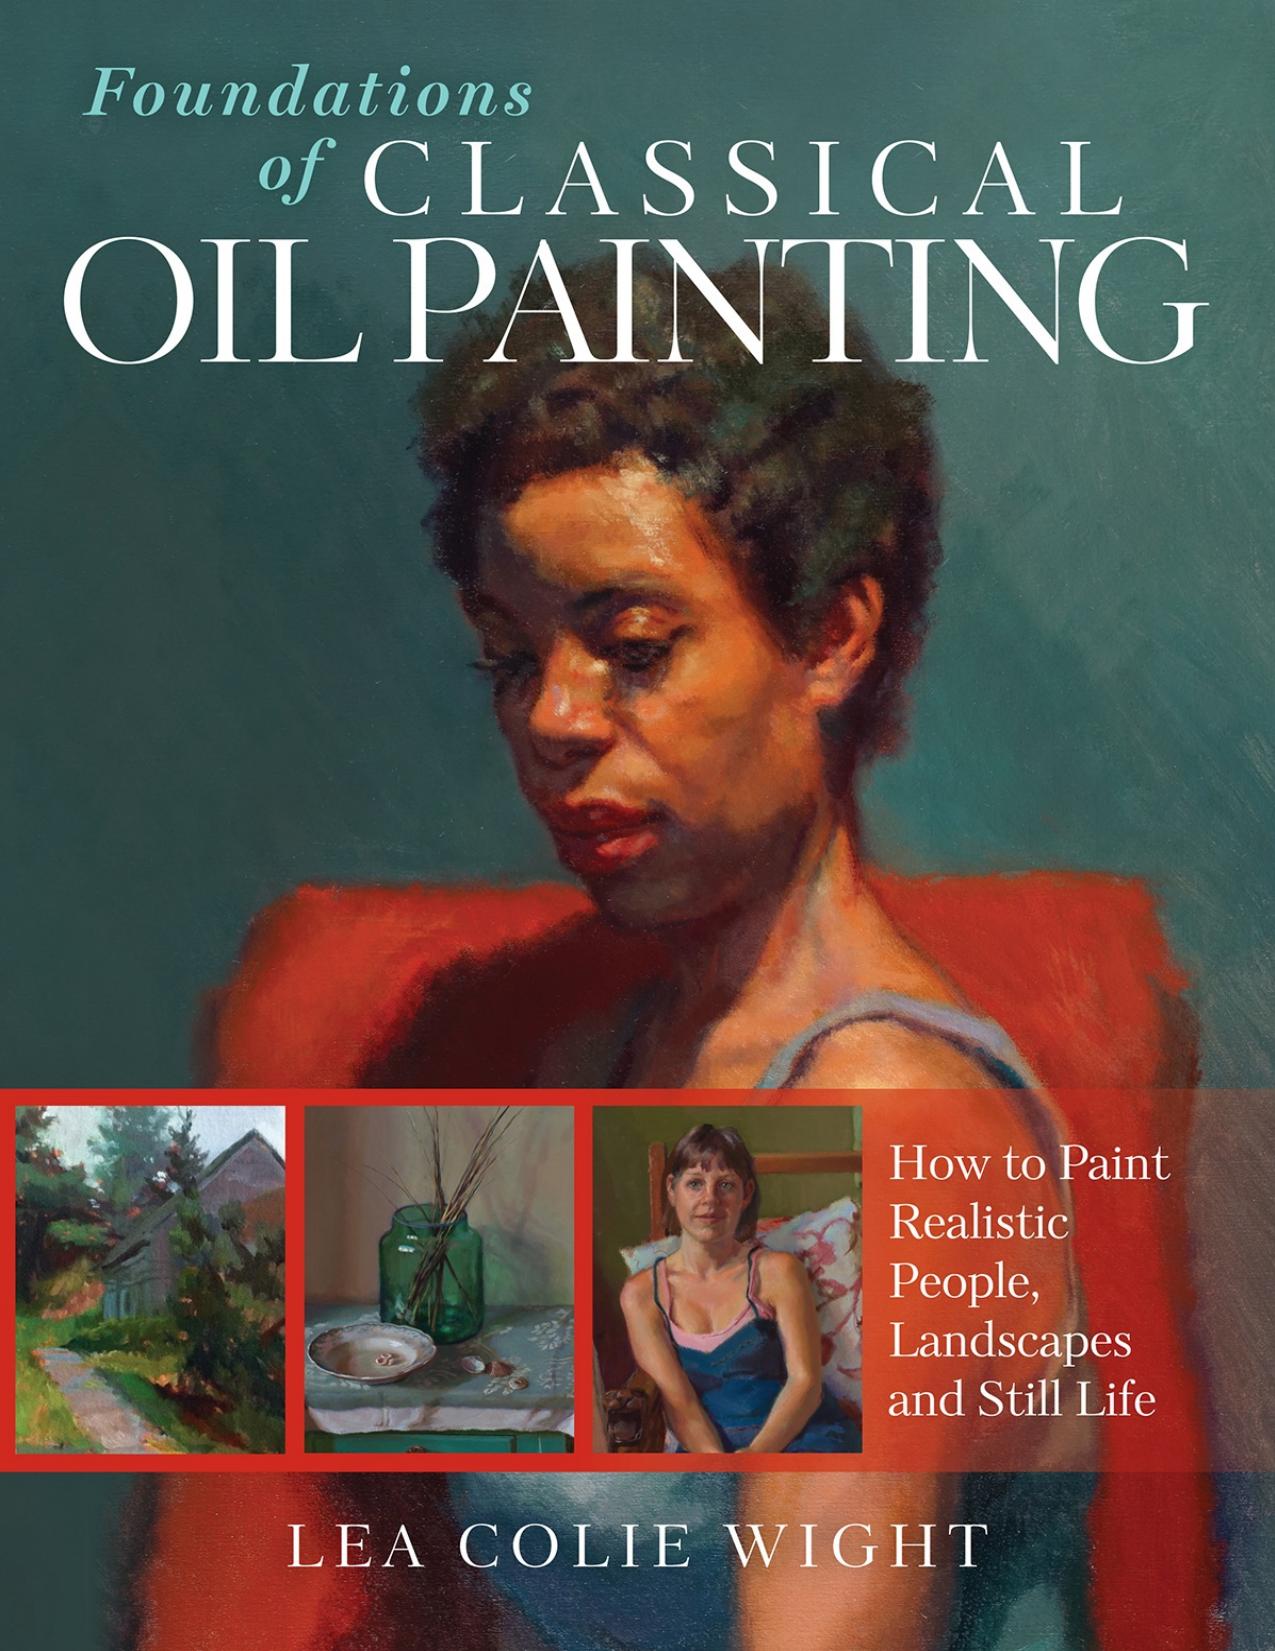 Foundations of Classical Oil Painting: How to Paint Realistic People, Landscapes and Still Life - PDFDrive.com